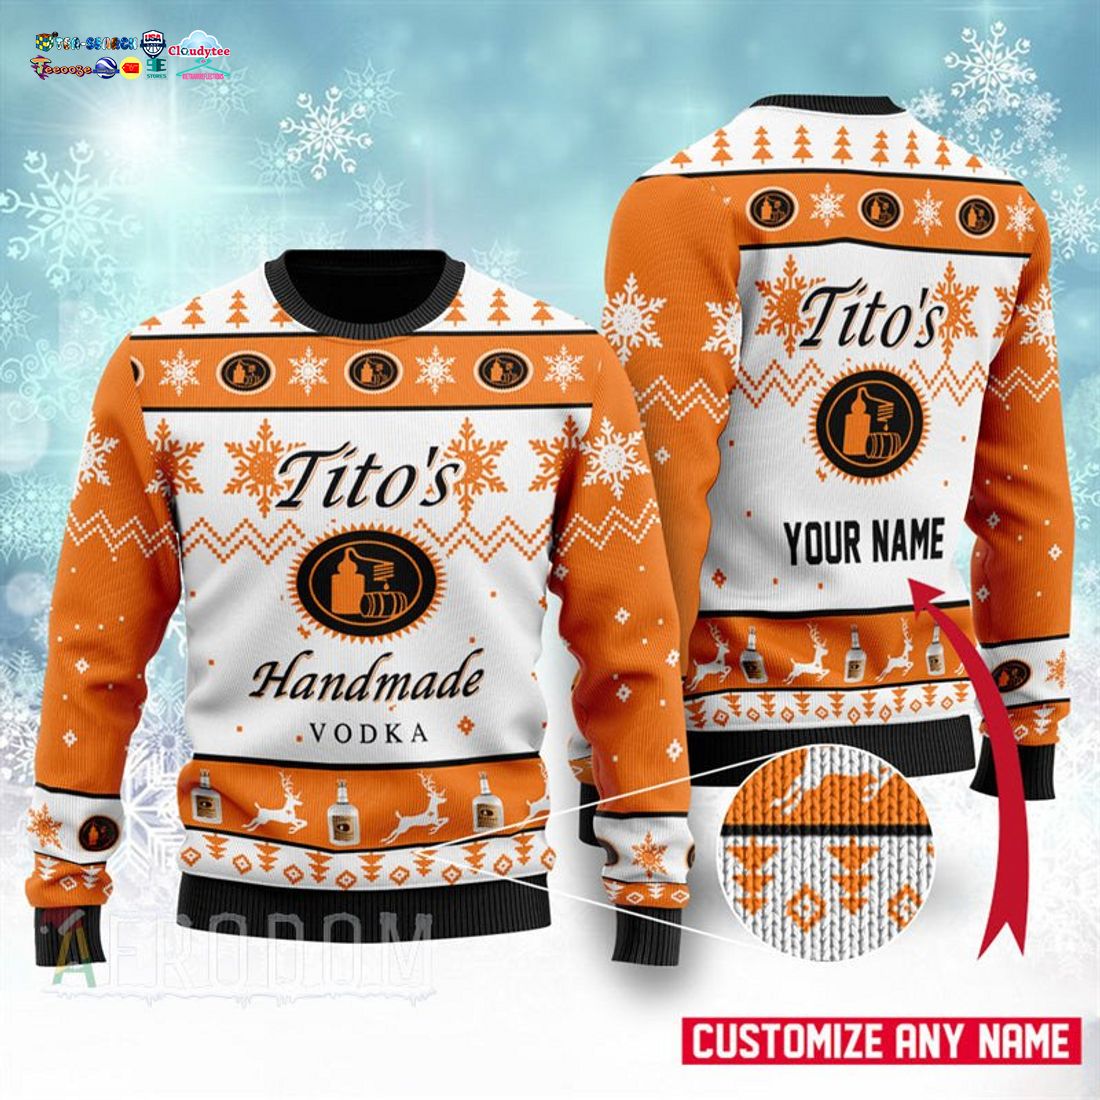 personalized-name-titos-handmade-vodka-ver-1-ugly-christmas-sweater-1-FuwX7.jpg